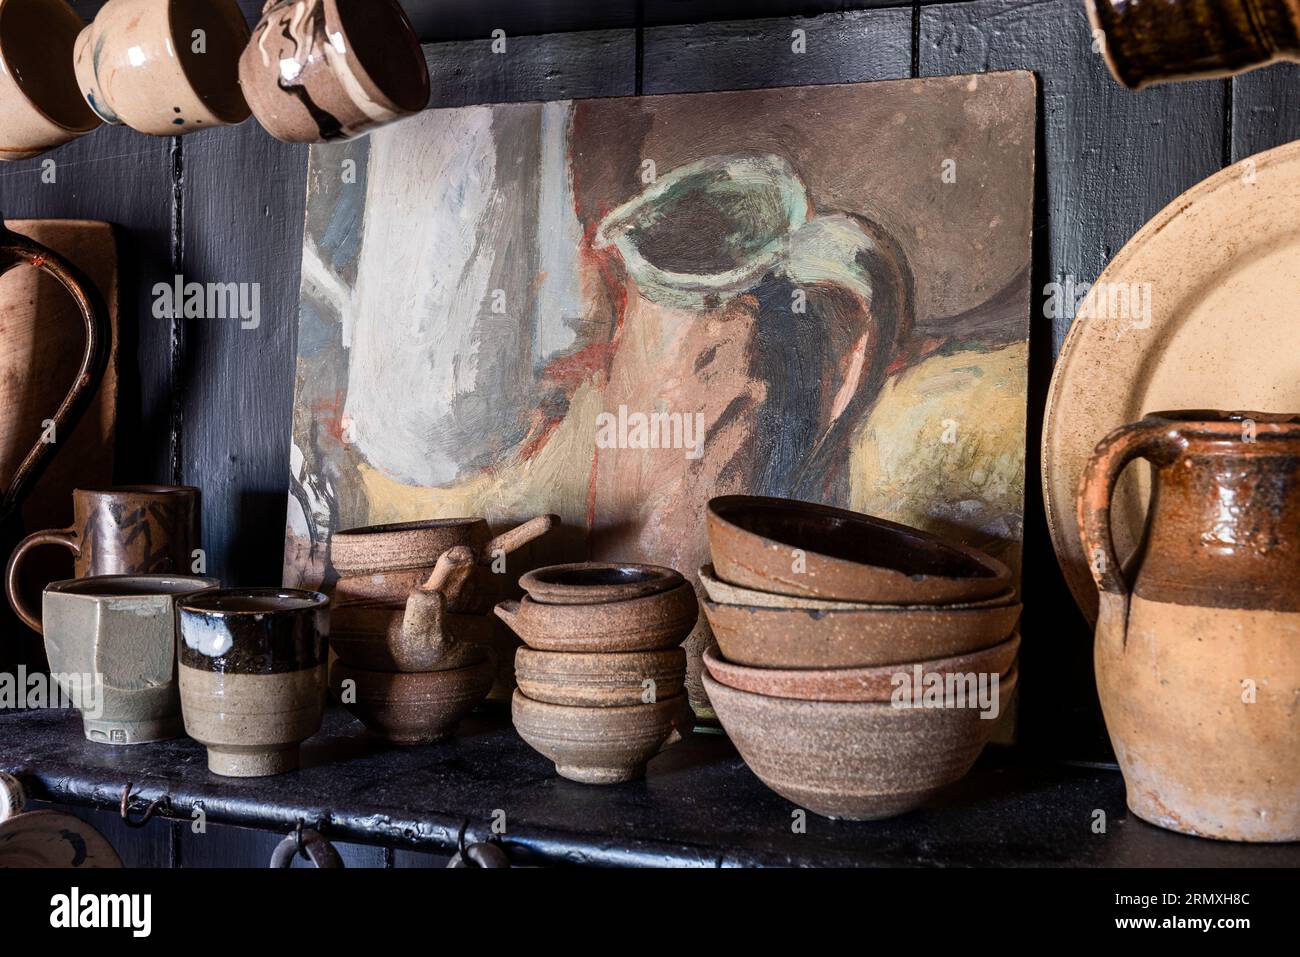 Pottery bowls and cups with artwork on dresser in 18th century flower loft conversion near Penzance in Cornwall, UK Stock Photo